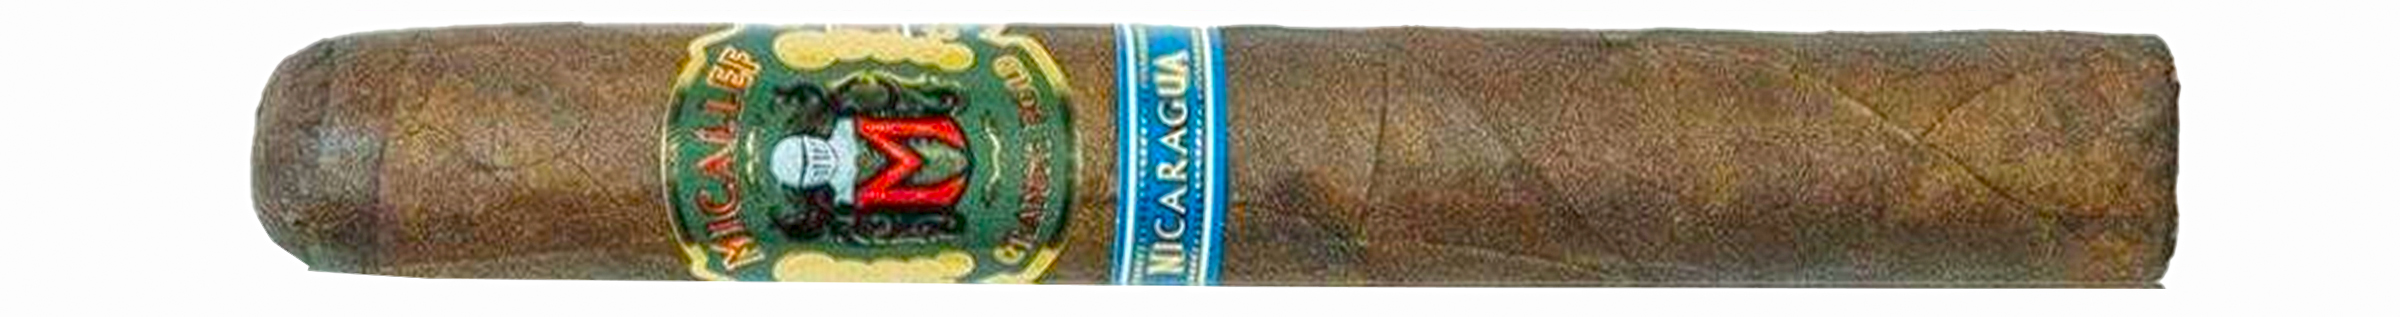 A cigar with Micallef Grande Bold Nicaragua label